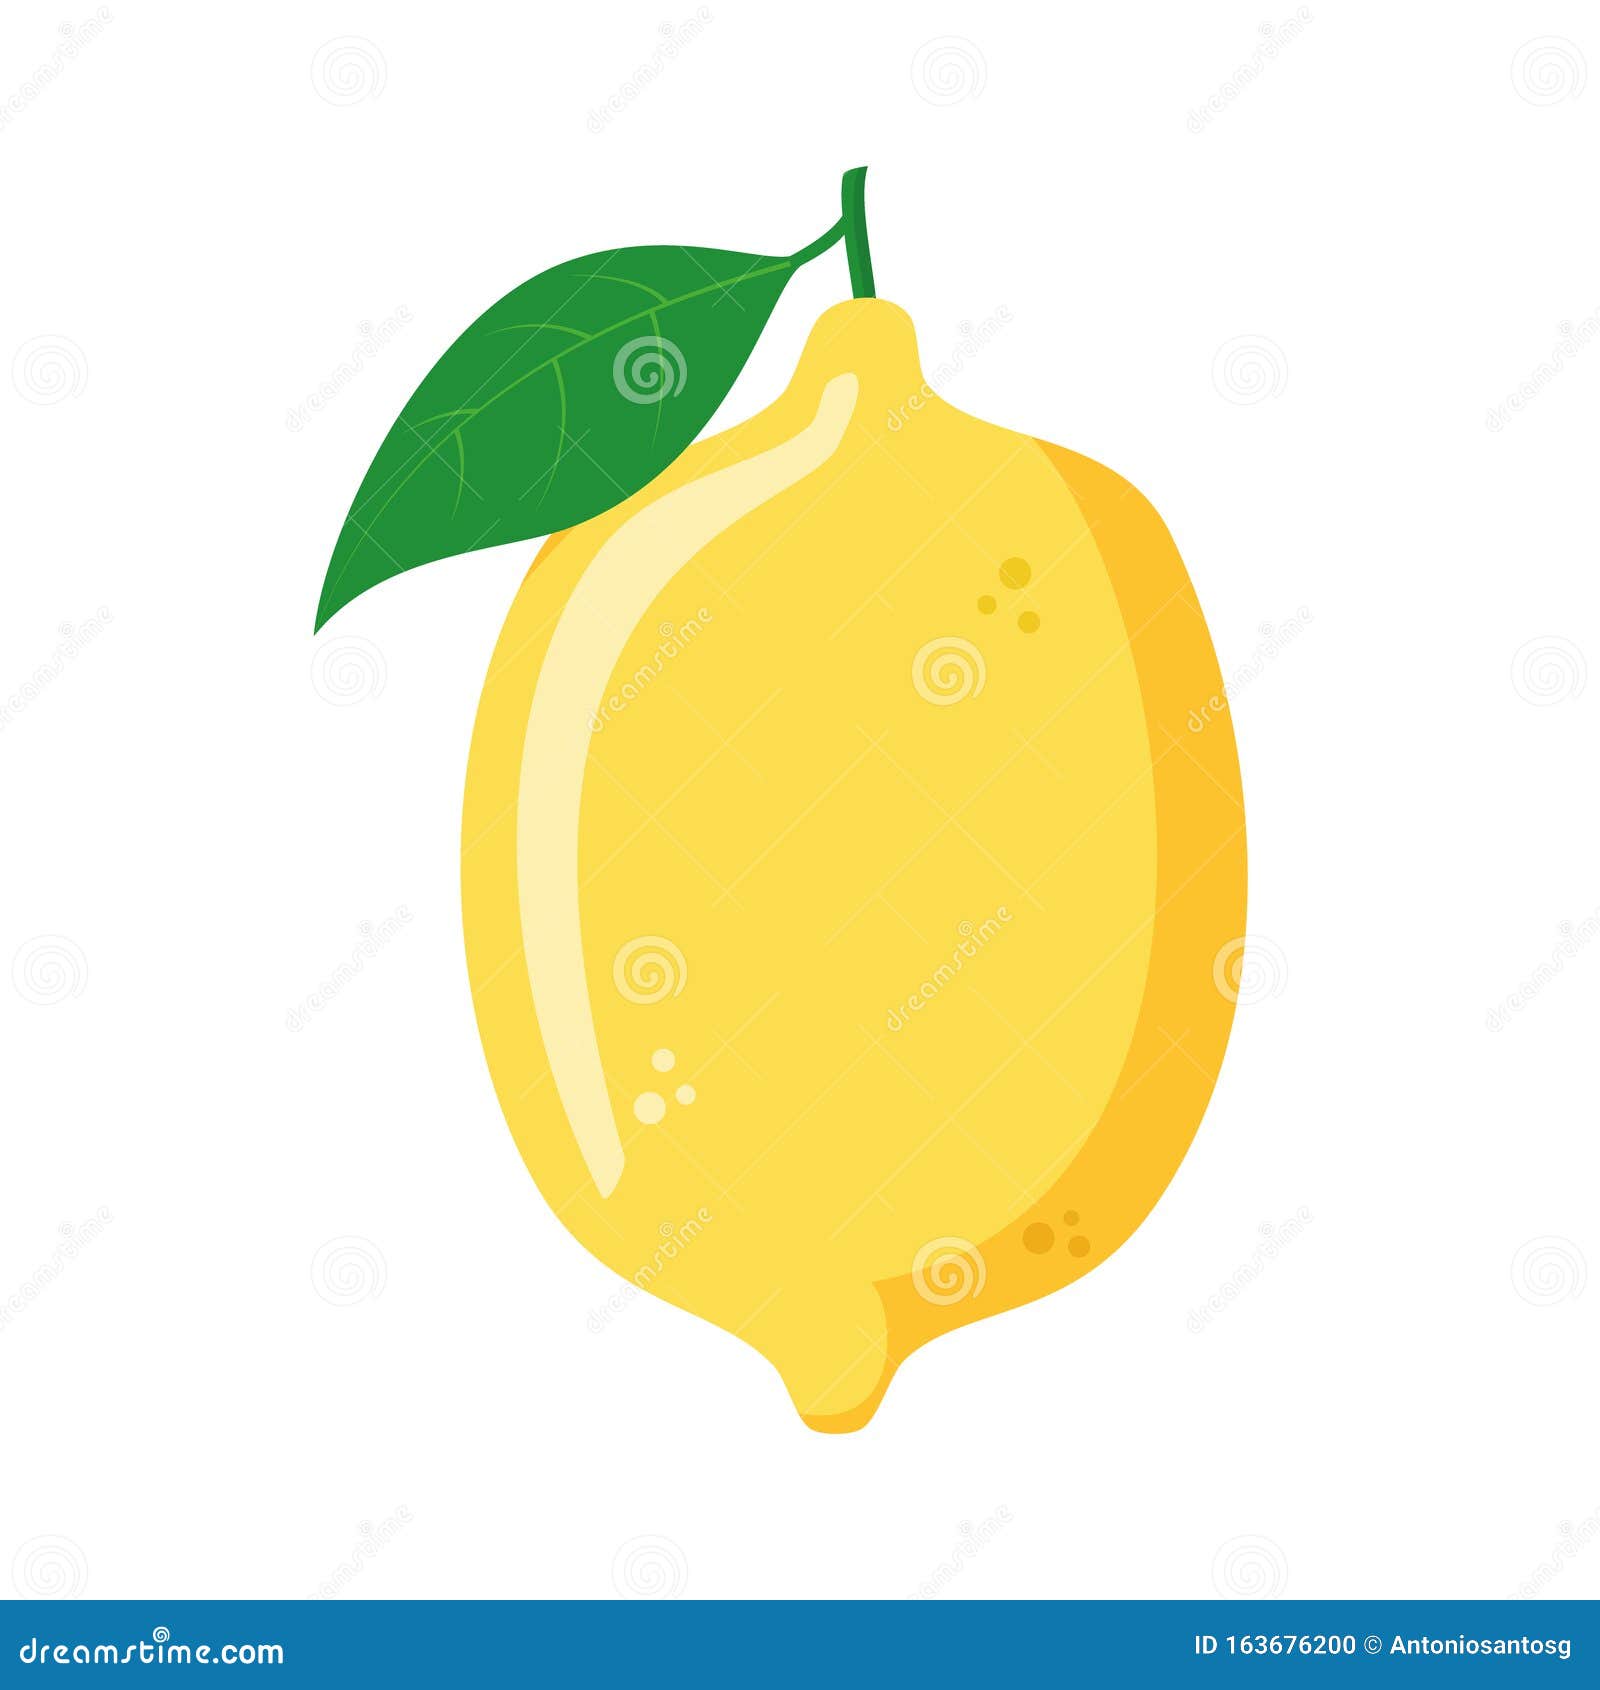 Vector Illustration of a Funny Lemon in Cartoon Style Stock Vector ...